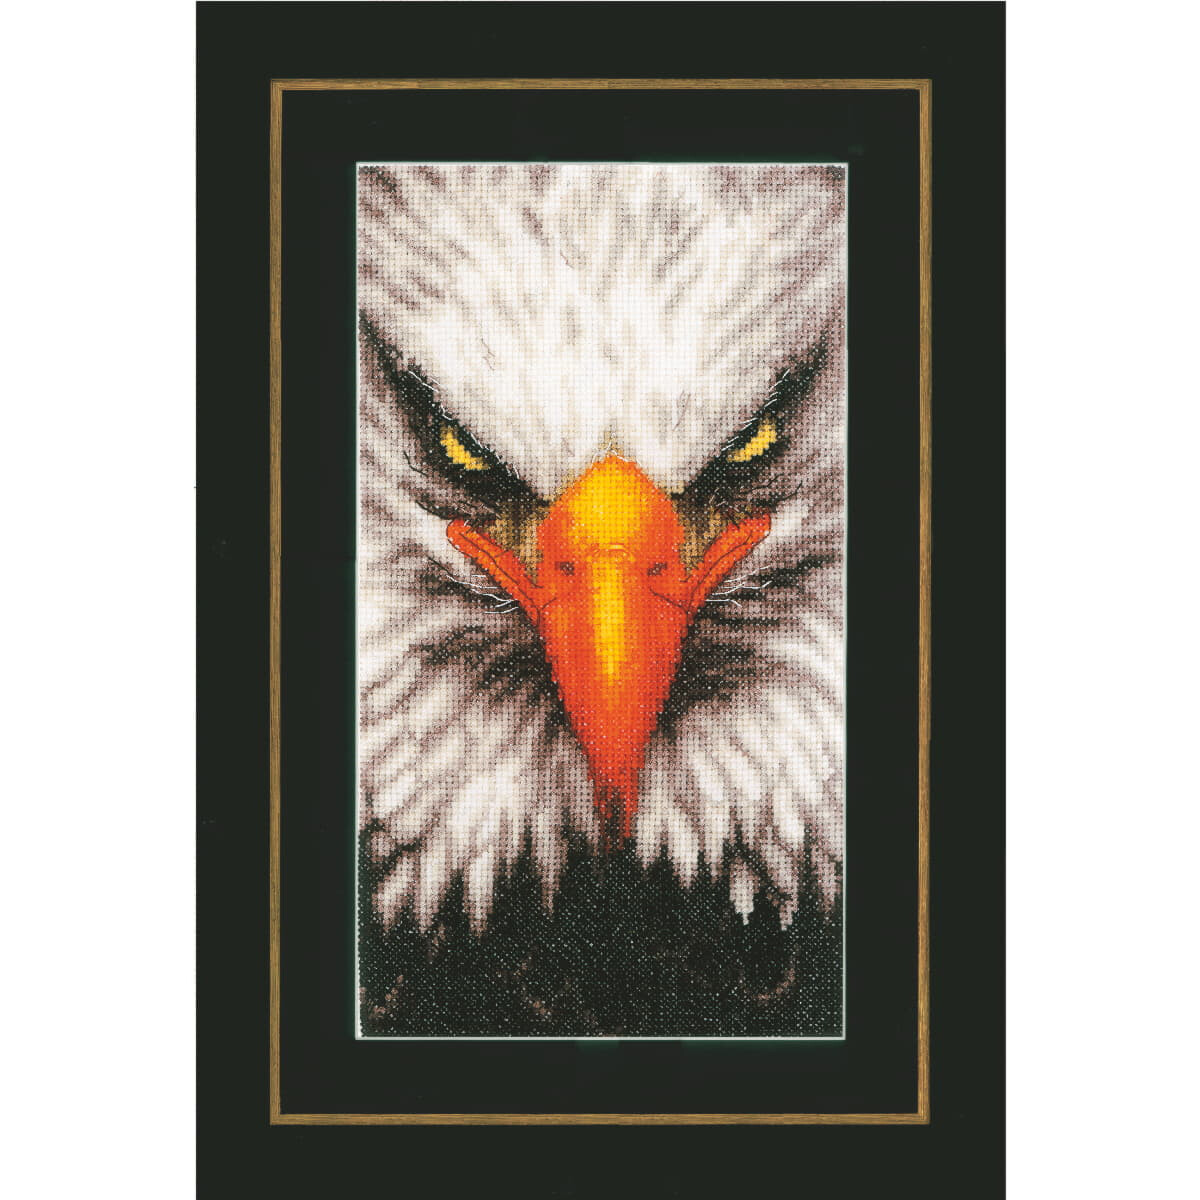 A detailed embroidery of a bald eagles face is centered...